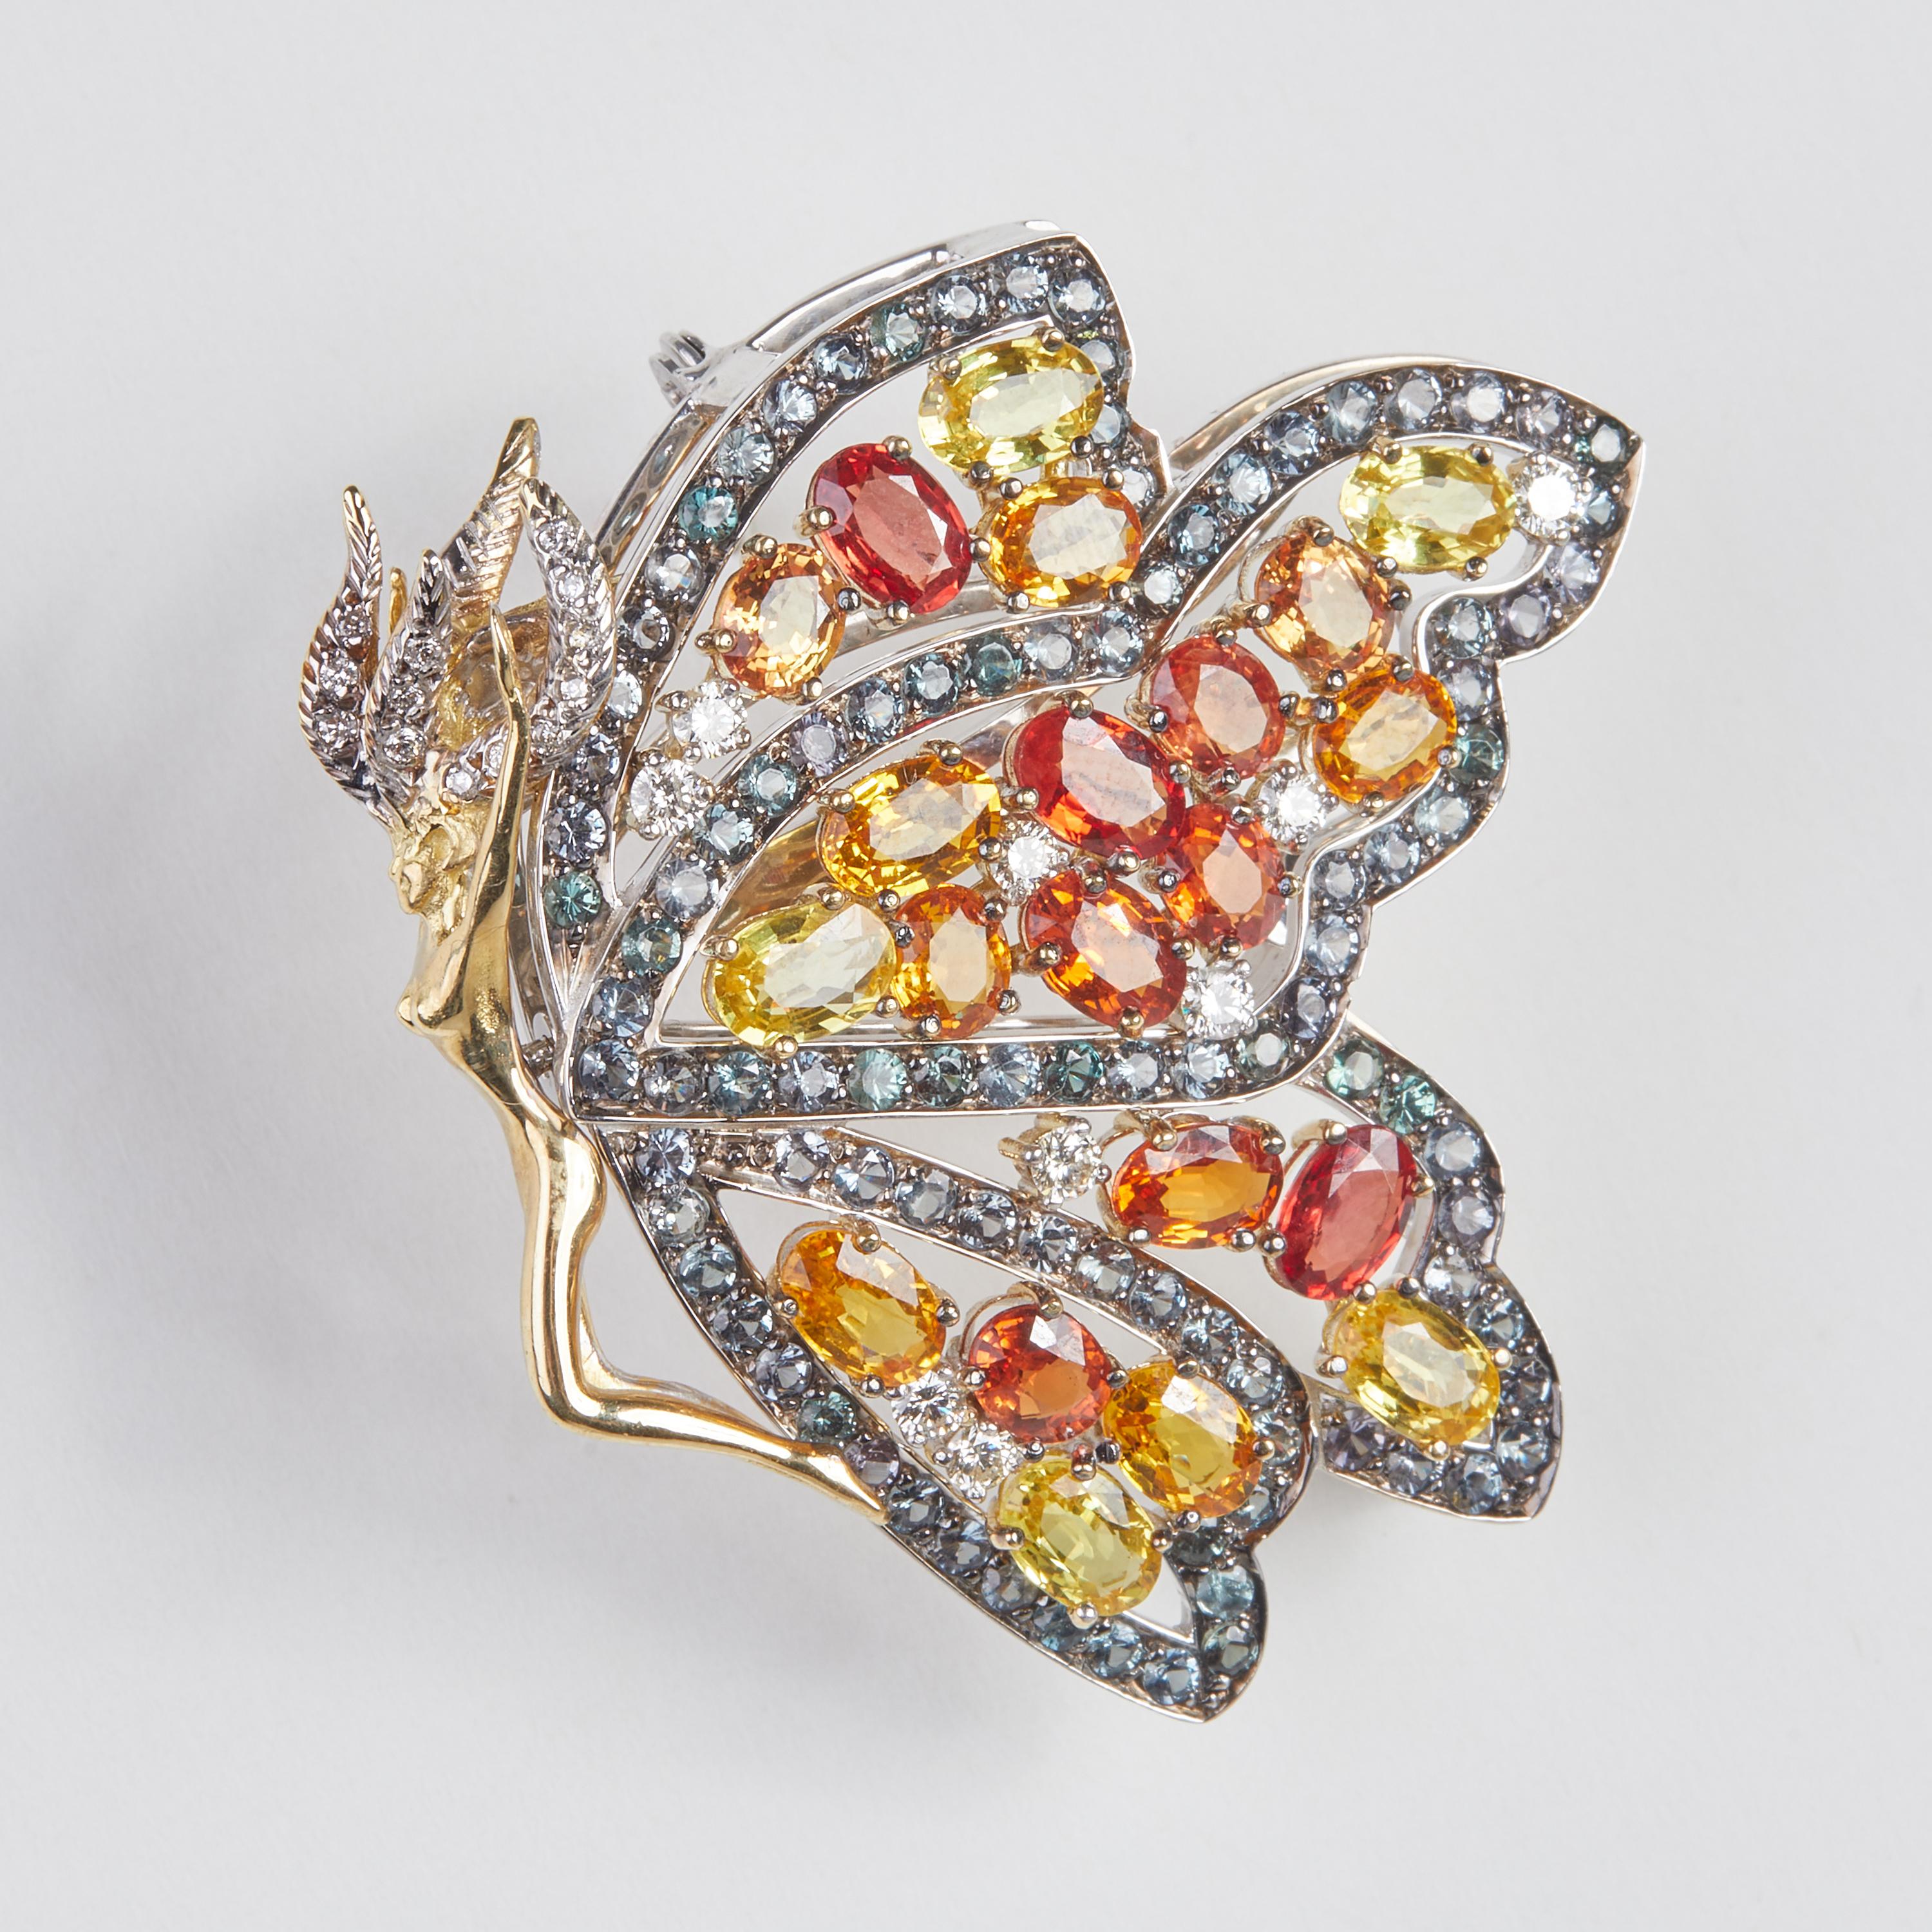 18 Karat YG/WG Diamond and color Stones Brooch


22 Diamonds 0.49 ct.
5 Sap.. orange 2.66 ct
97  Garnet green 3.66 ct.
3 Sap.. red/orange 1.70 ct
8 Sap. gold 3.99 ct
5 Sap.. yelow 2.88 ct.



Founded in 1974, Gianni Lazzaro is a family-owned